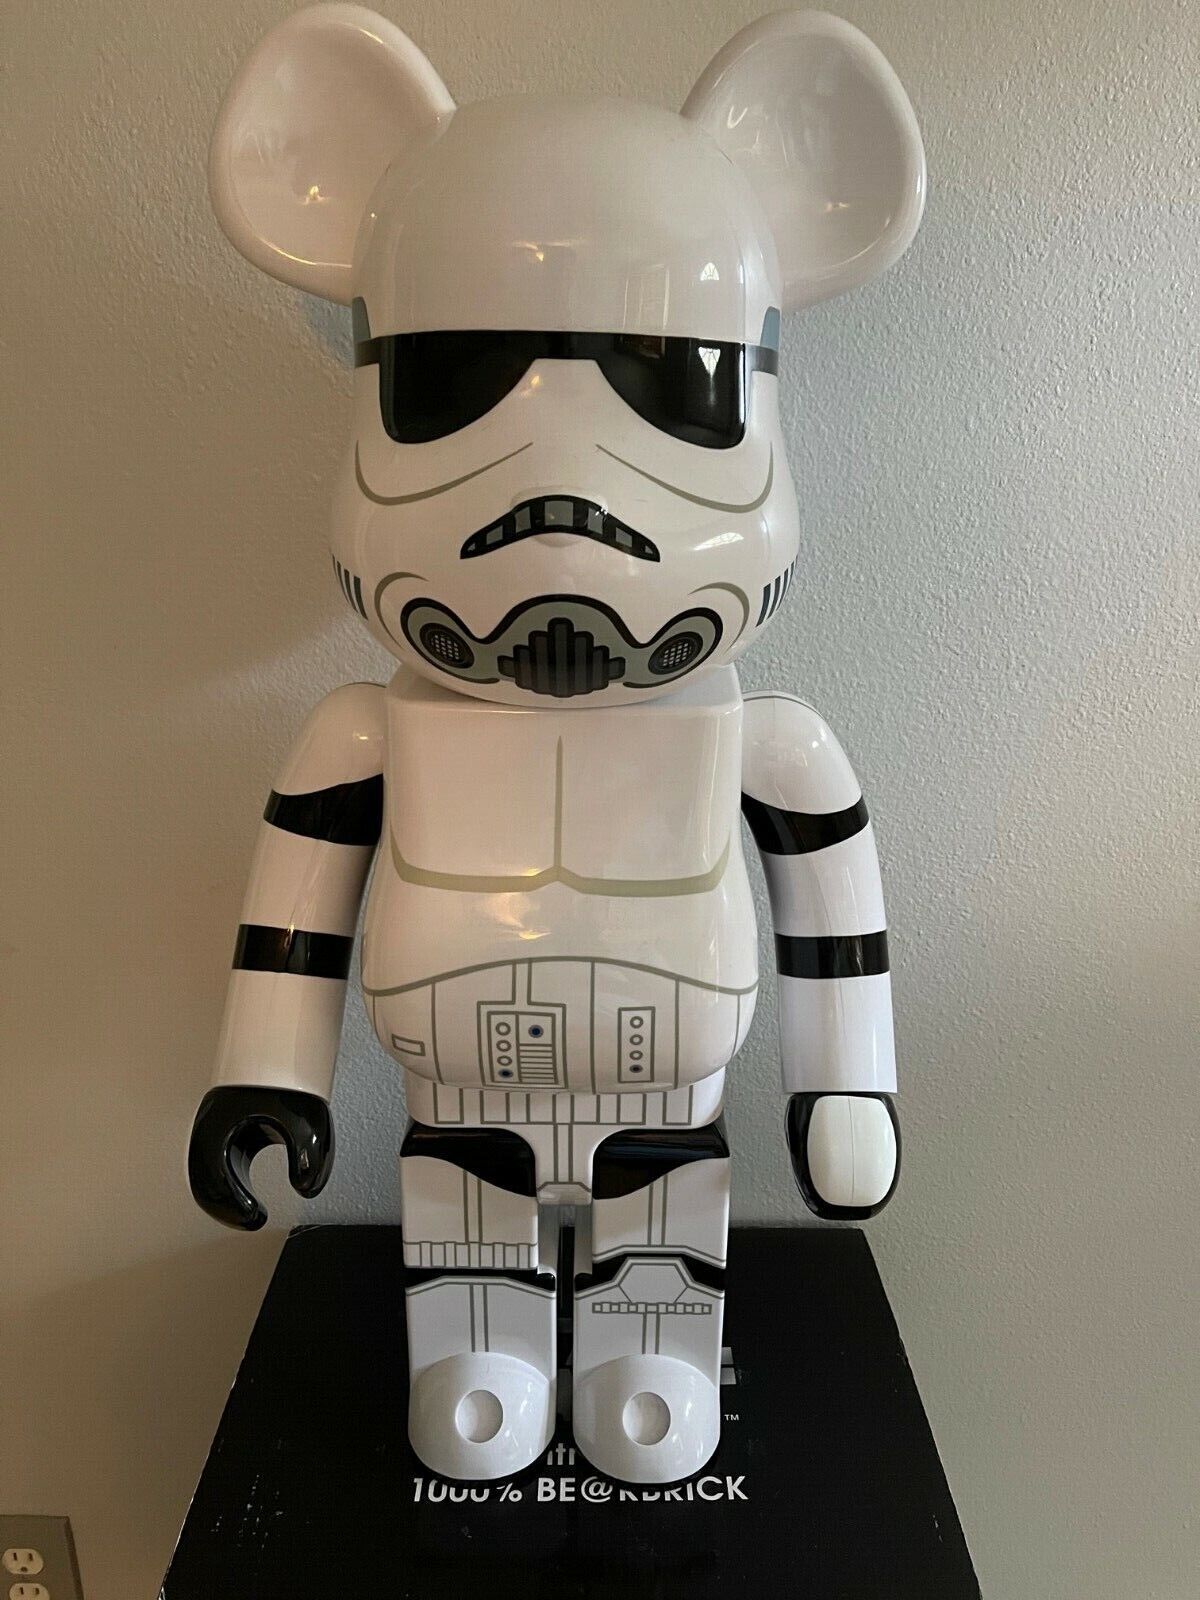 Star Wars Stormtrooper 1000% Be@rbrick Bearbrick **SHIPS FROM USA**